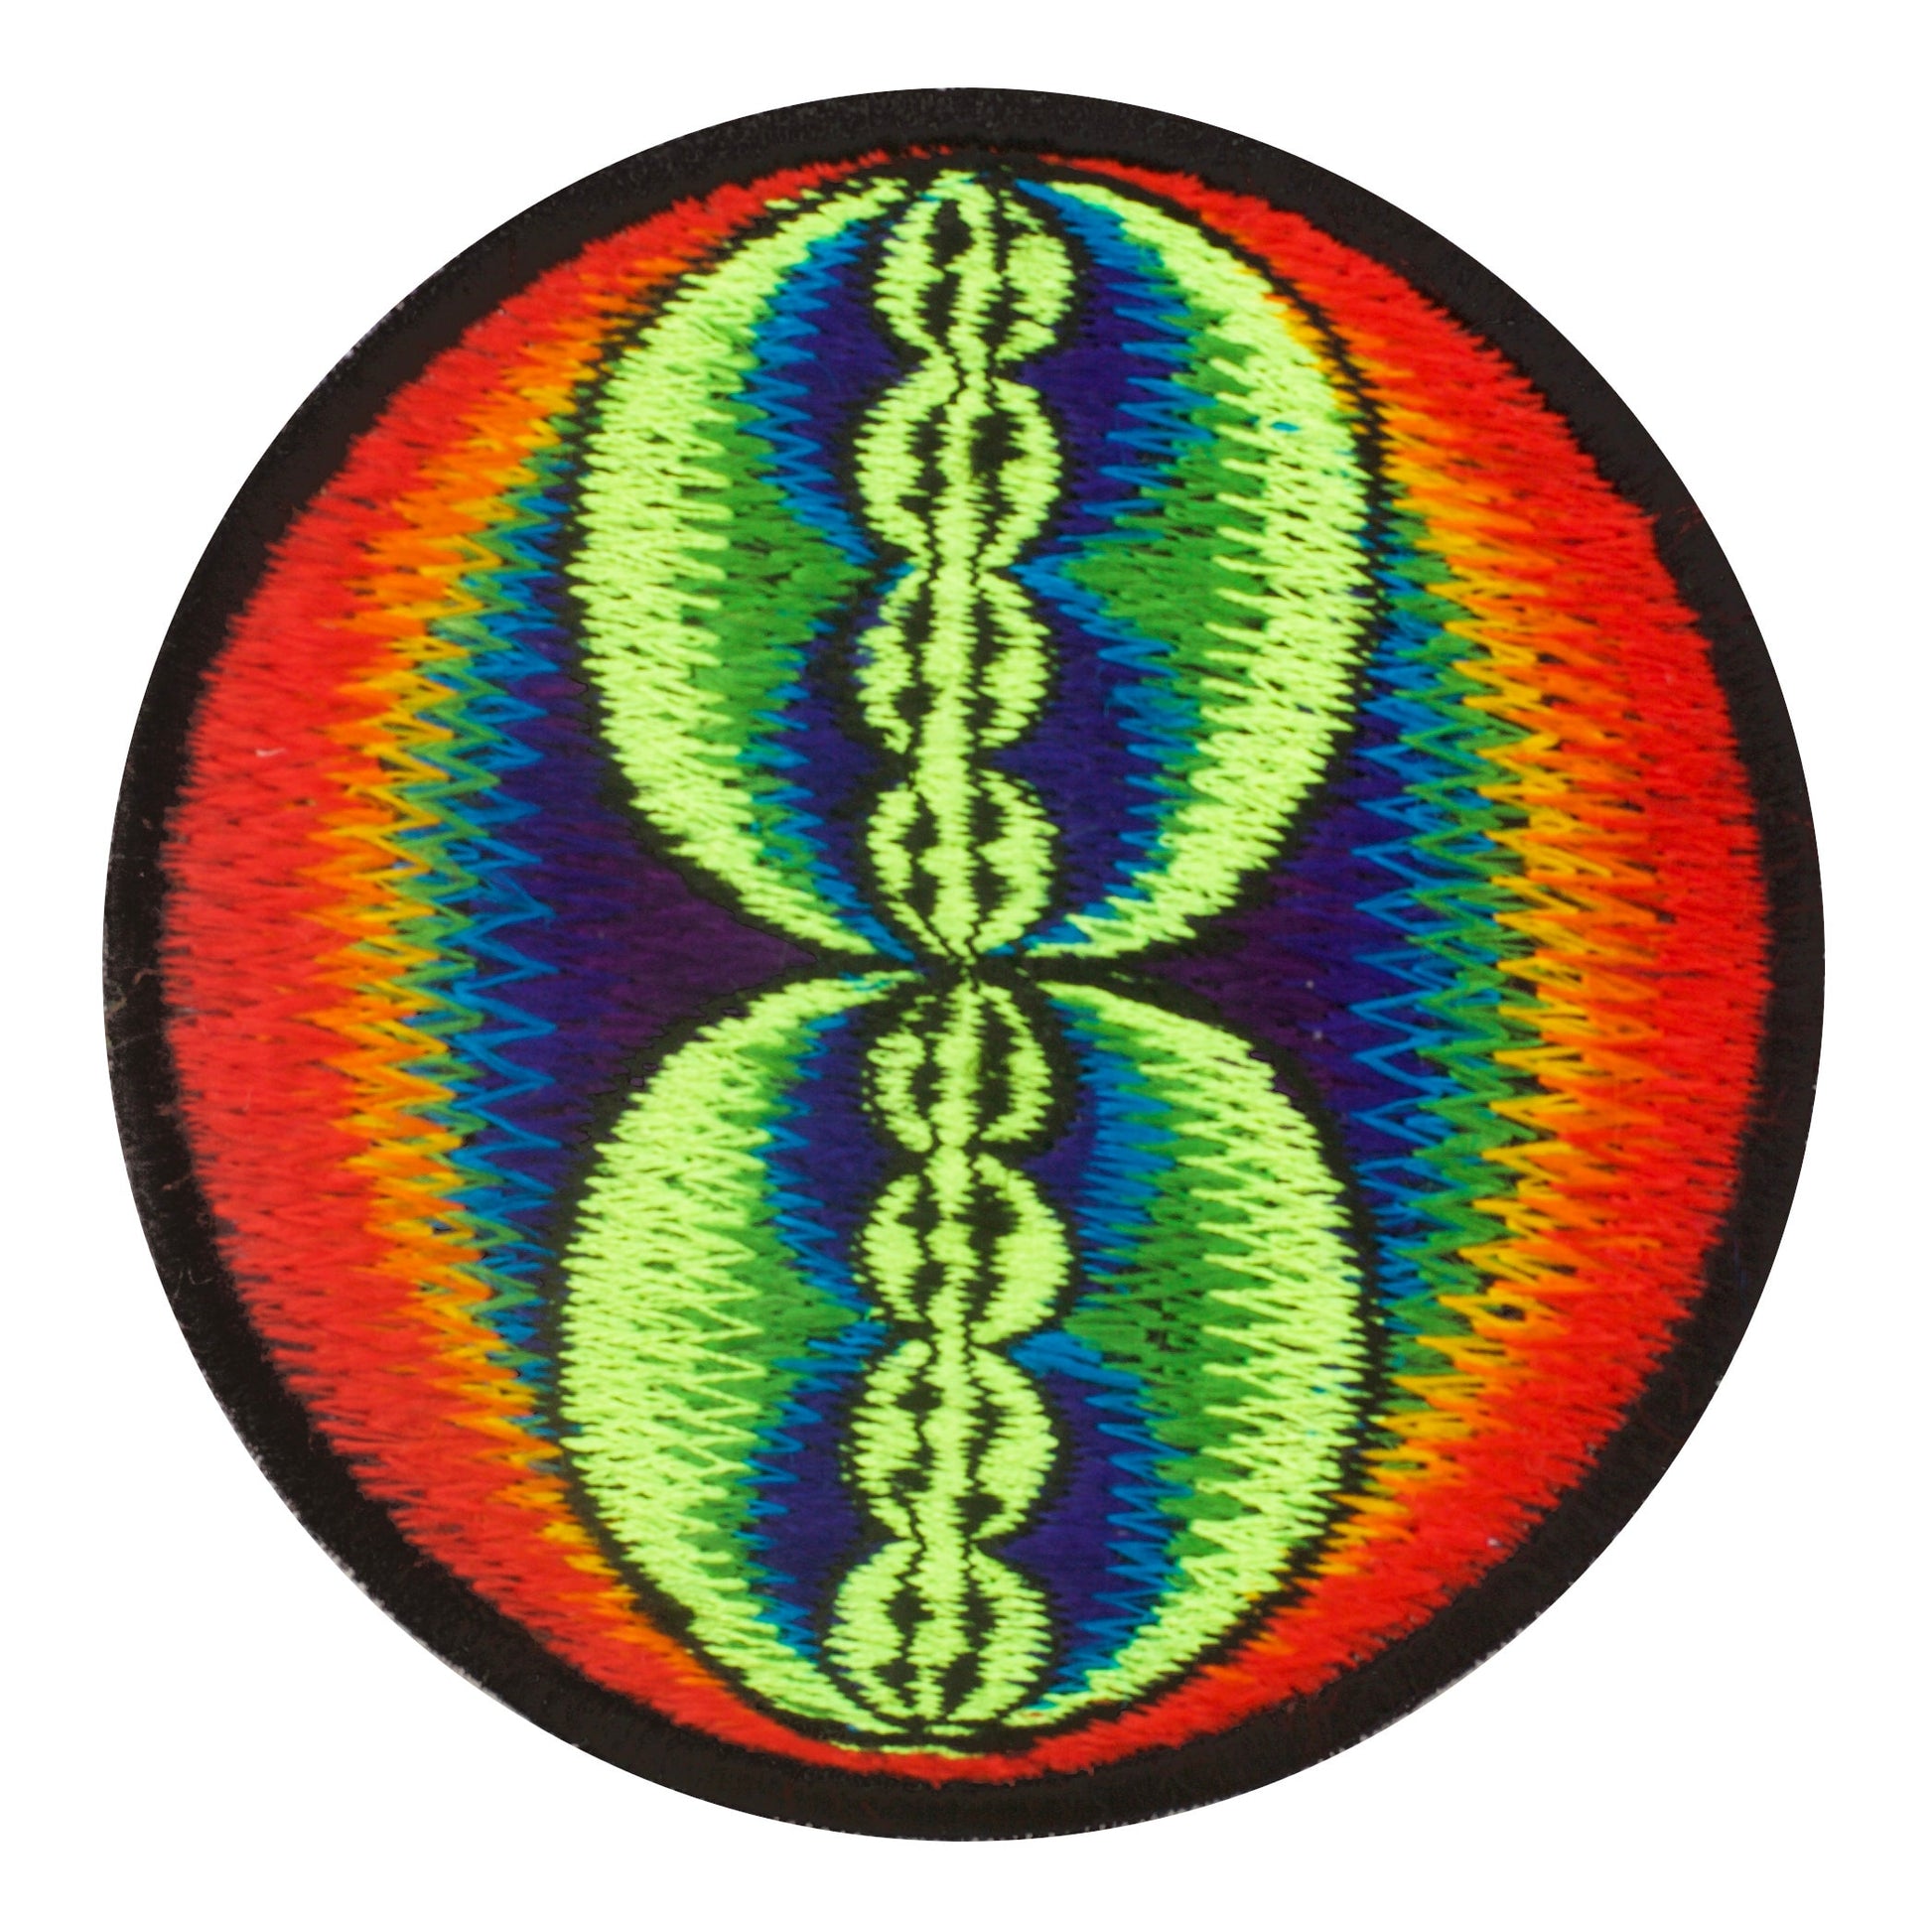 Rainbow Infinity Fractal crop circle patch blacklight embroidery for sew on handcrafted item cropcircle alien art